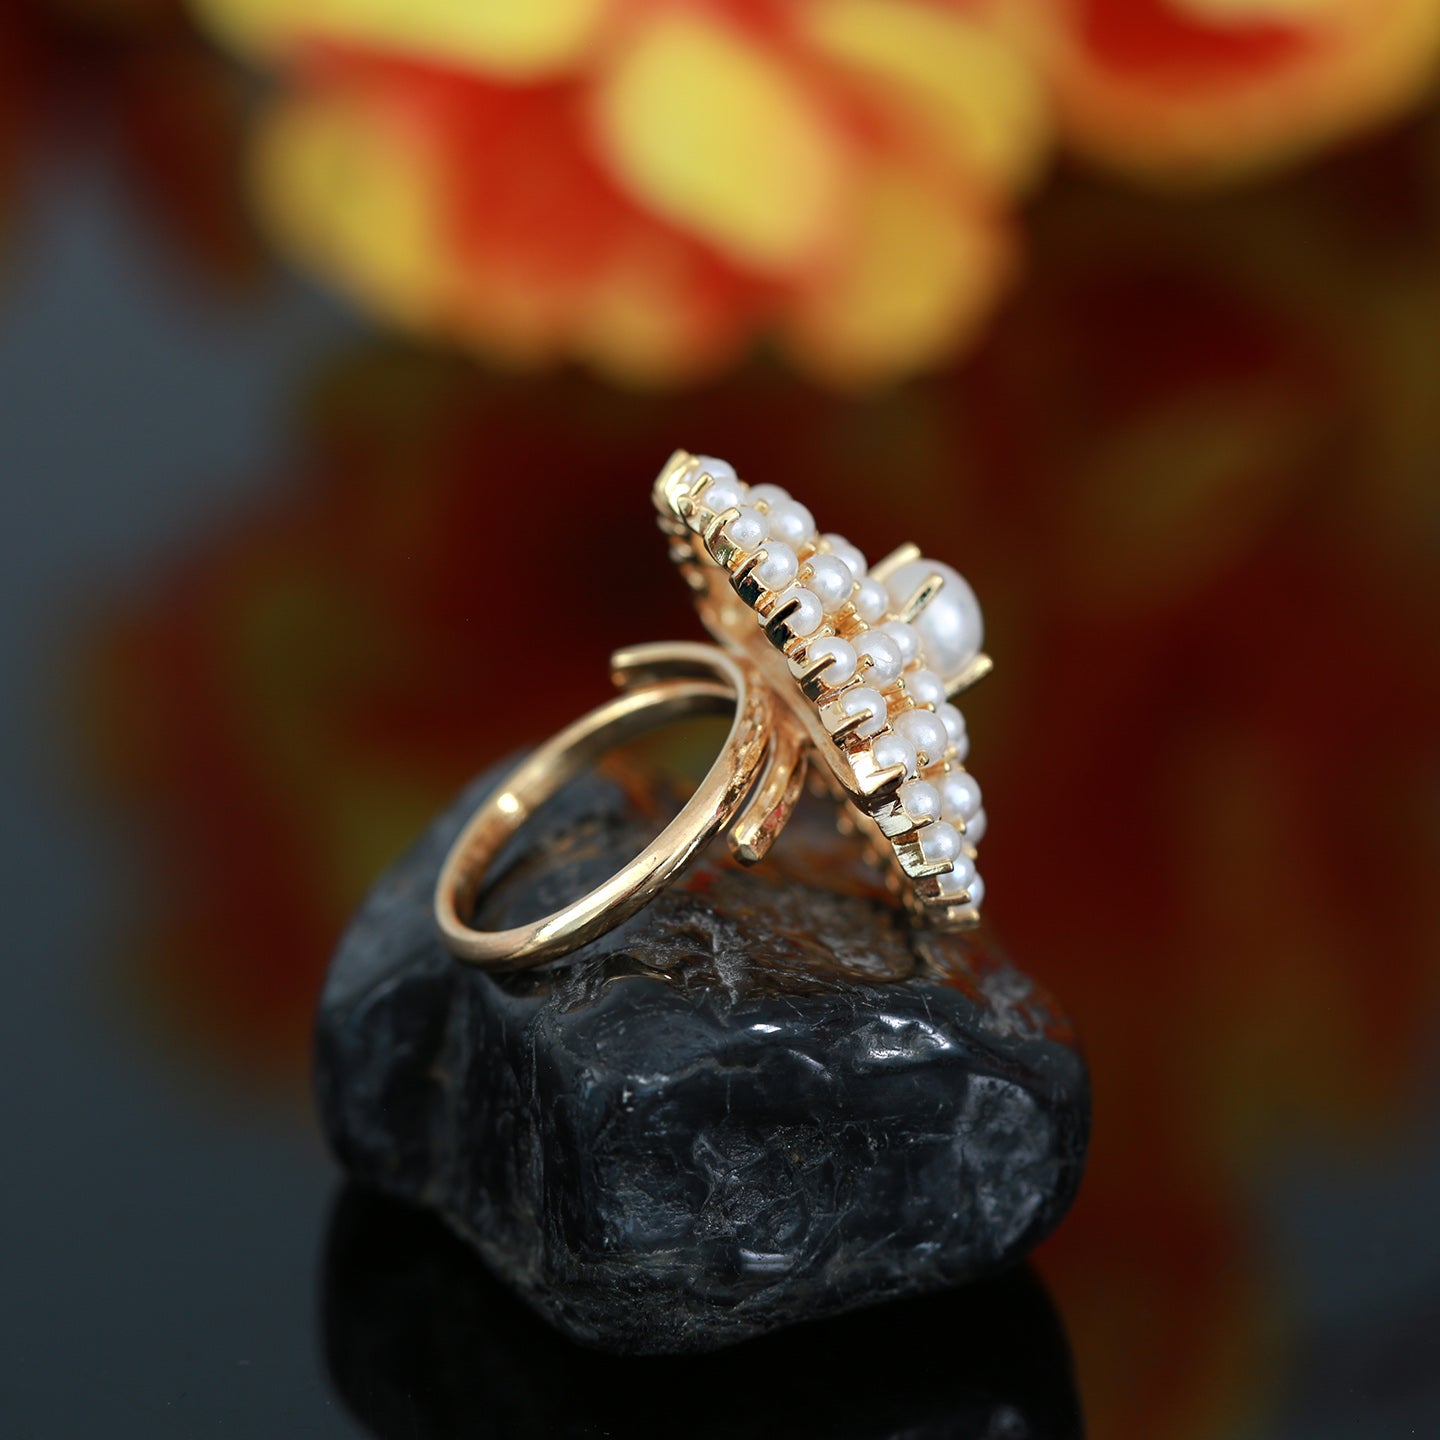 Gold Polish cocktail Pearl ring with CZ American Diamonds, RubyEmerald Floral design Wedding party ring for Women, CZ Diamond Statement Ring